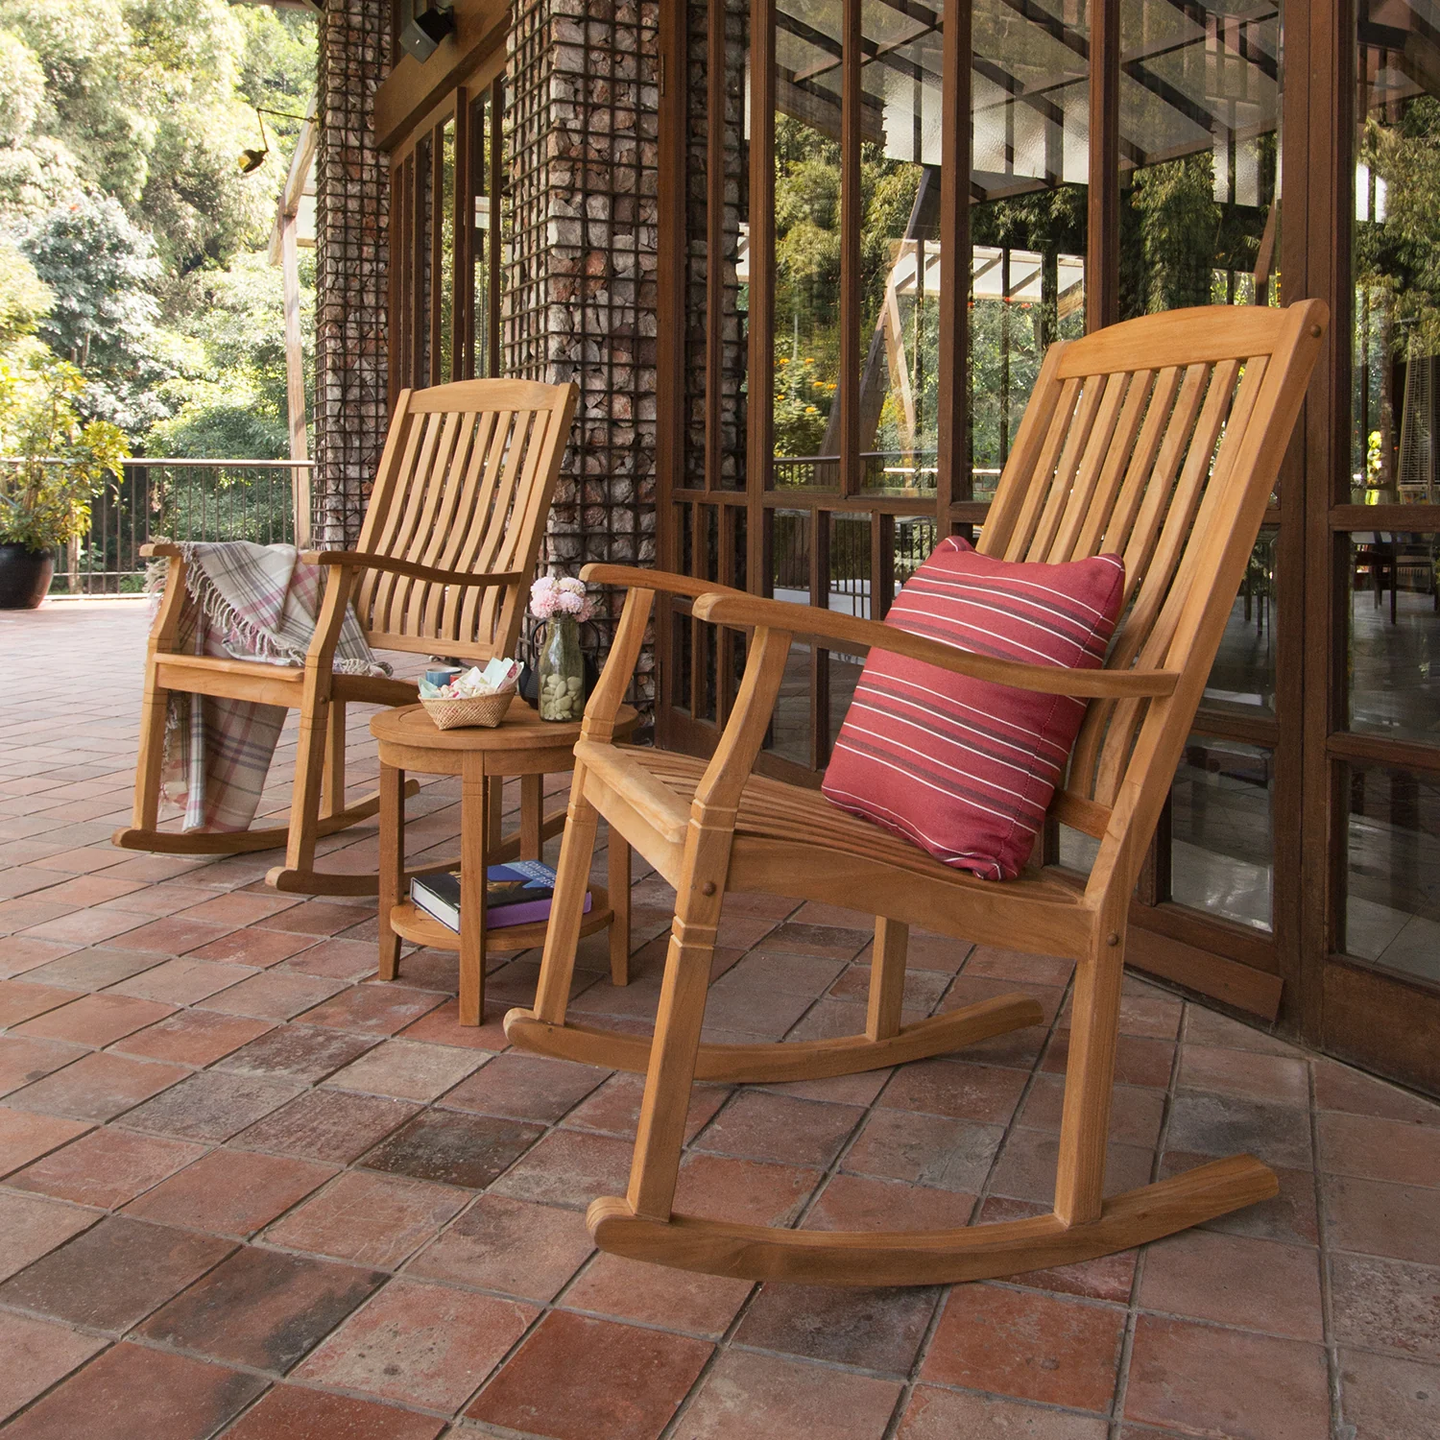 Why No Porch is Complete Without Rockers